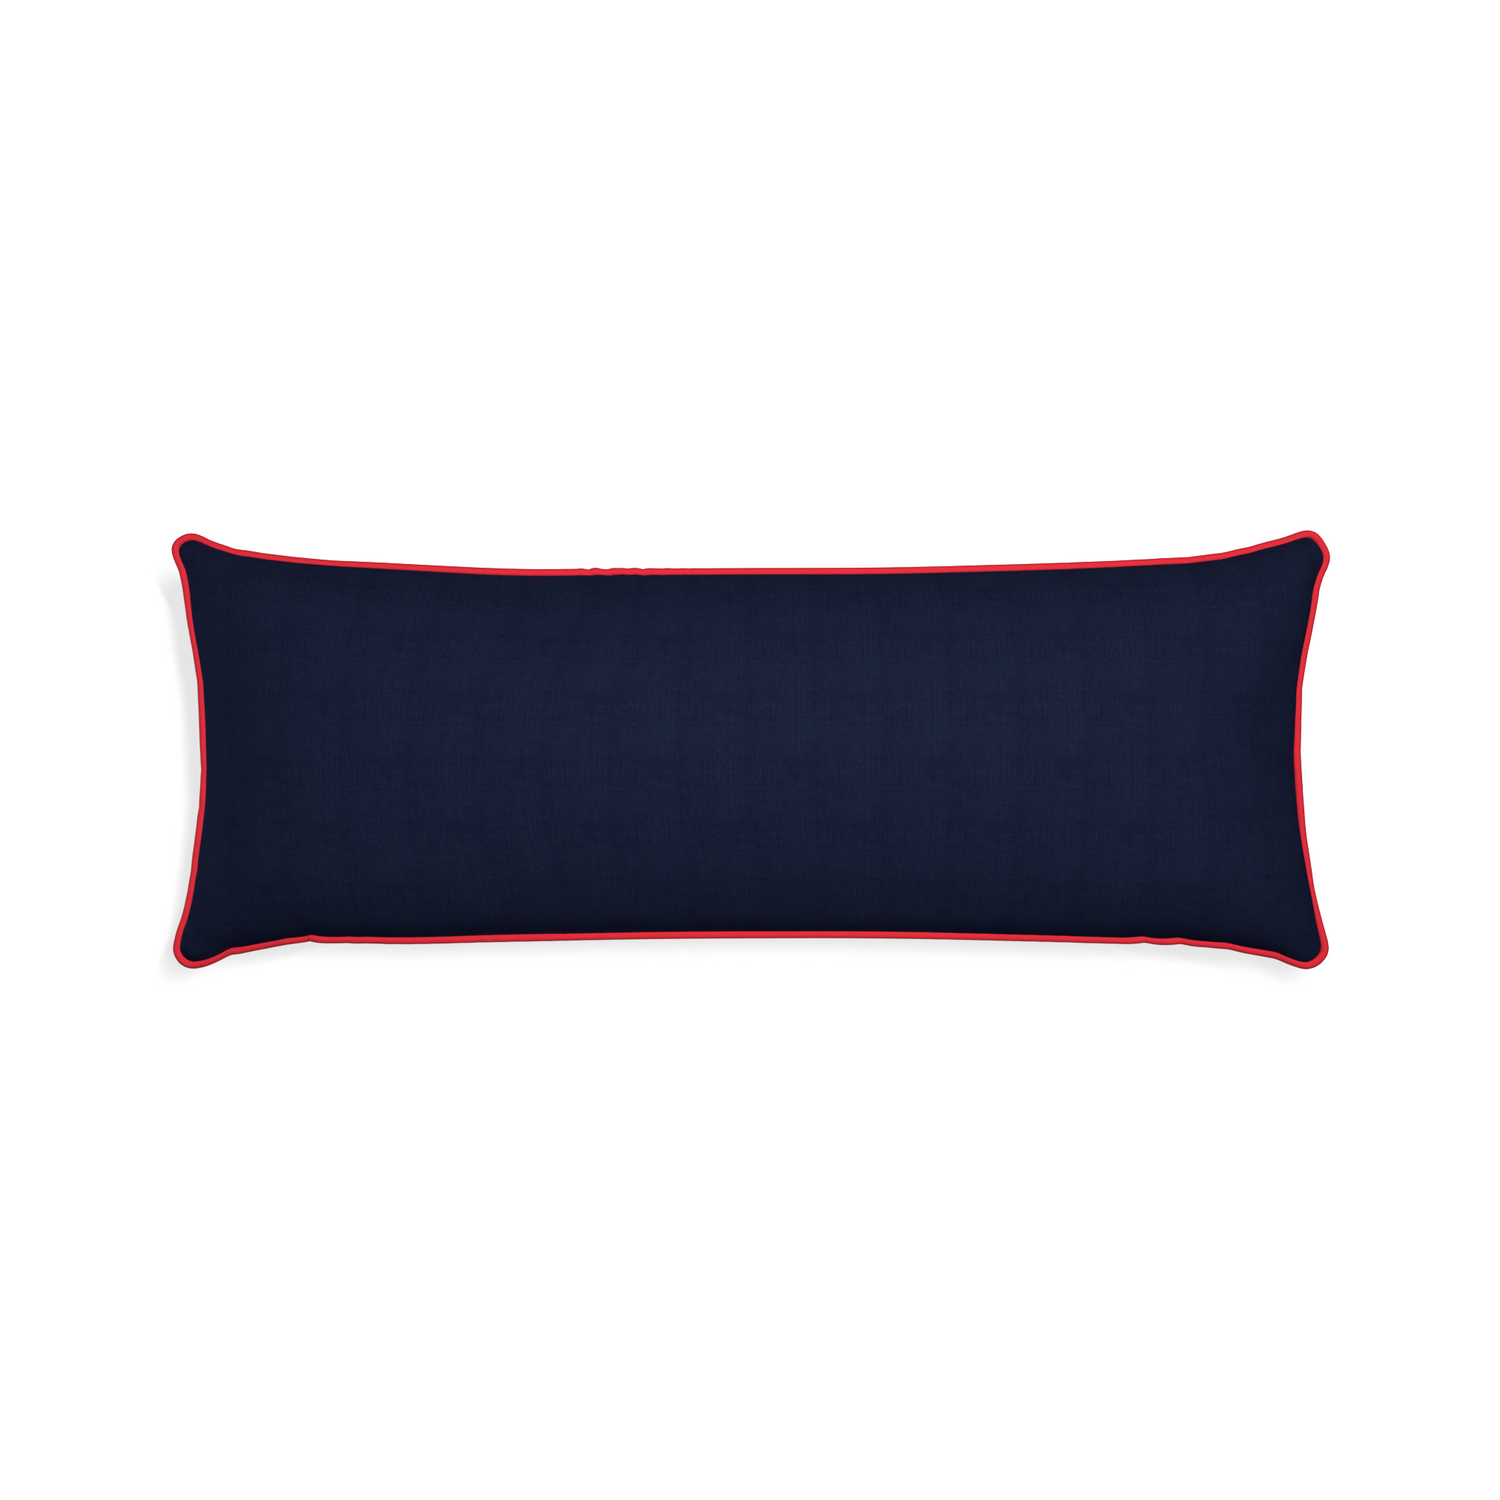 Xl-lumbar midnight custom navy bluepillow with cherry piping on white background